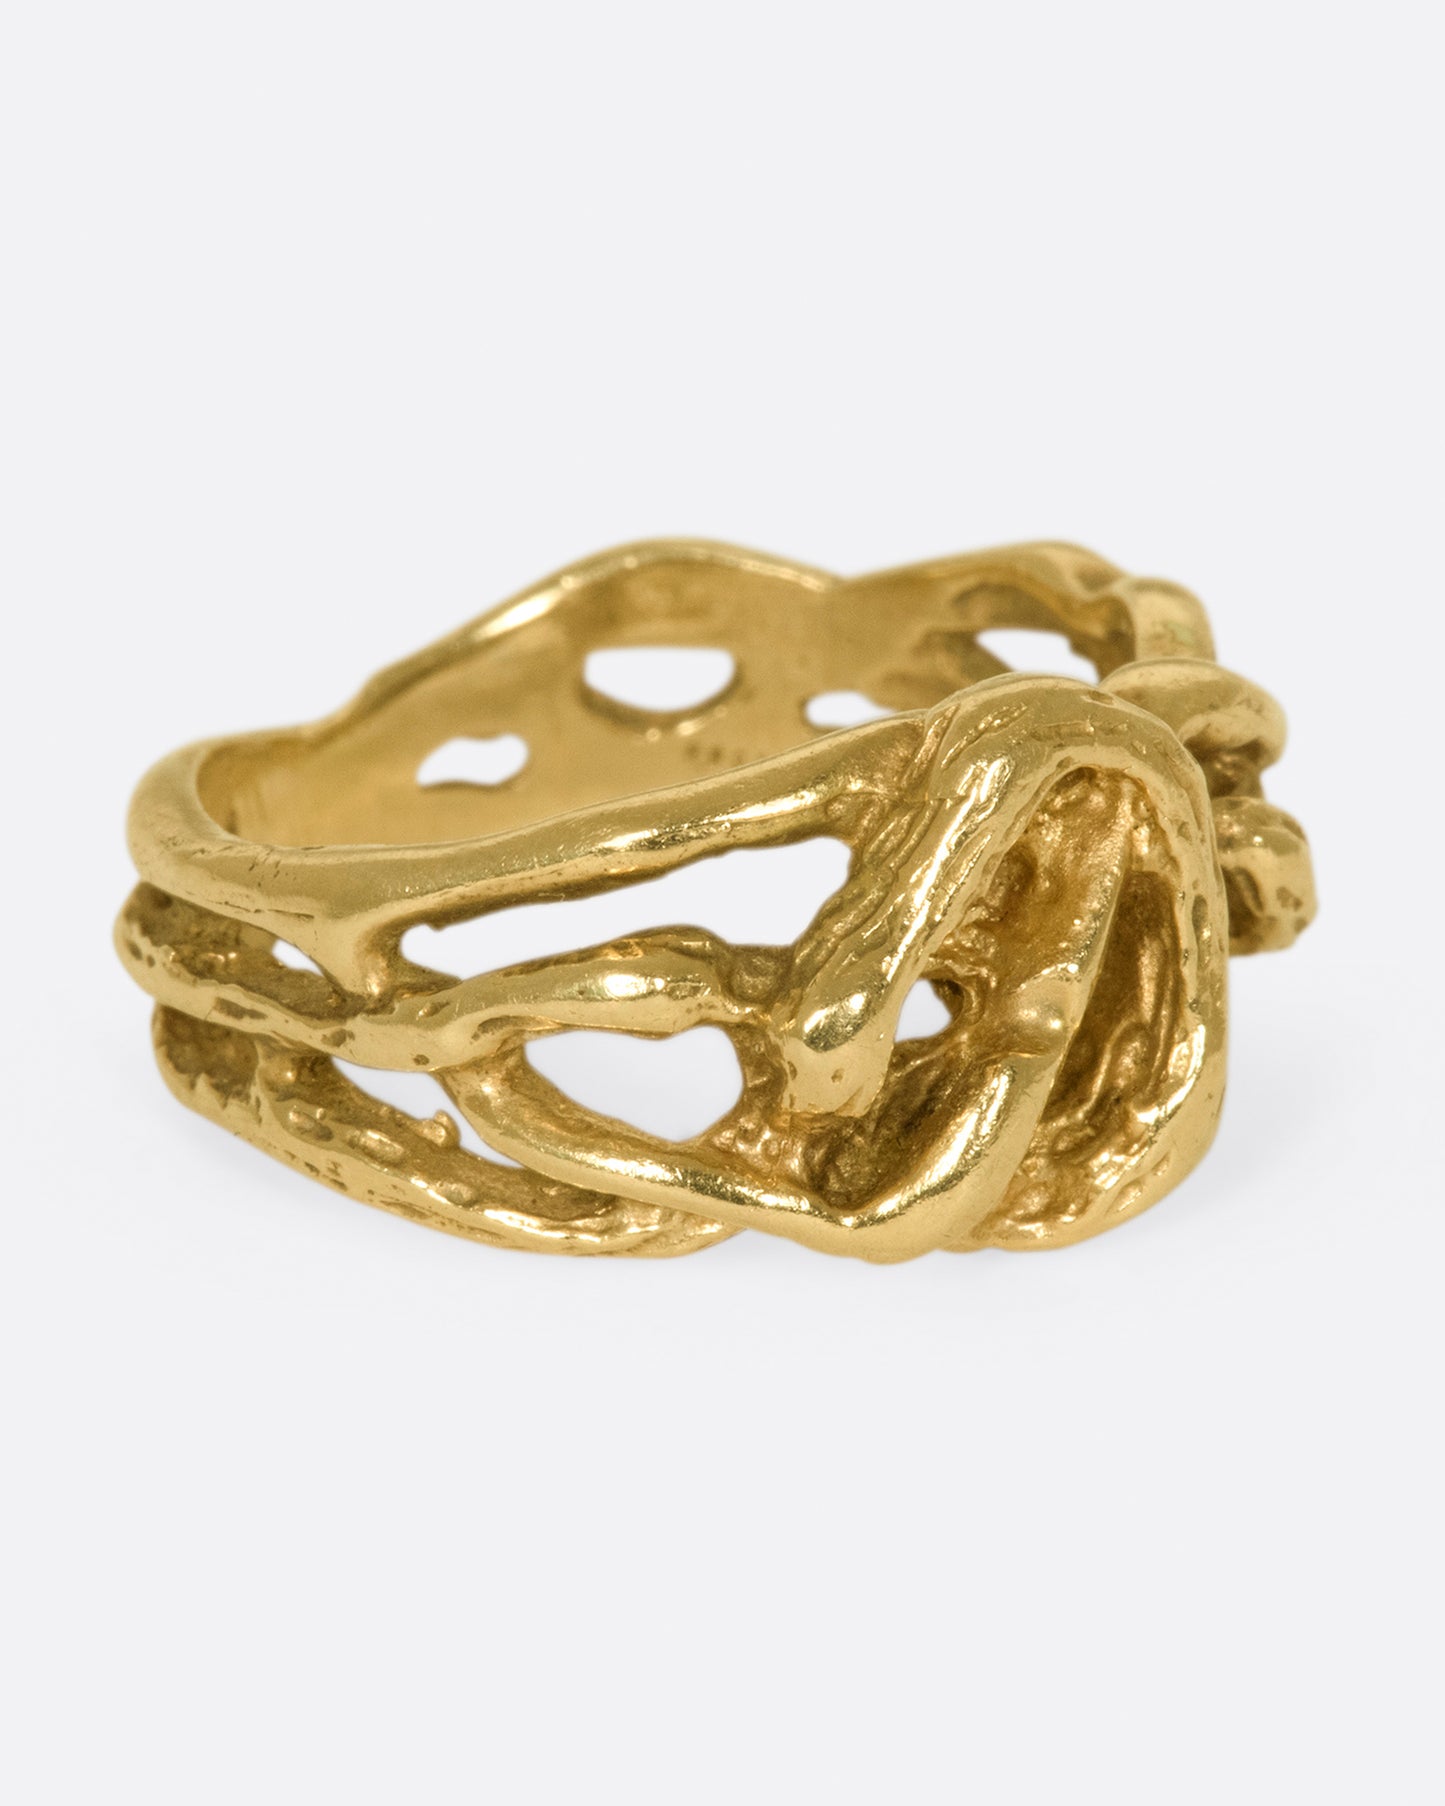 A vintage gold ring in the shape of interwoven vines.